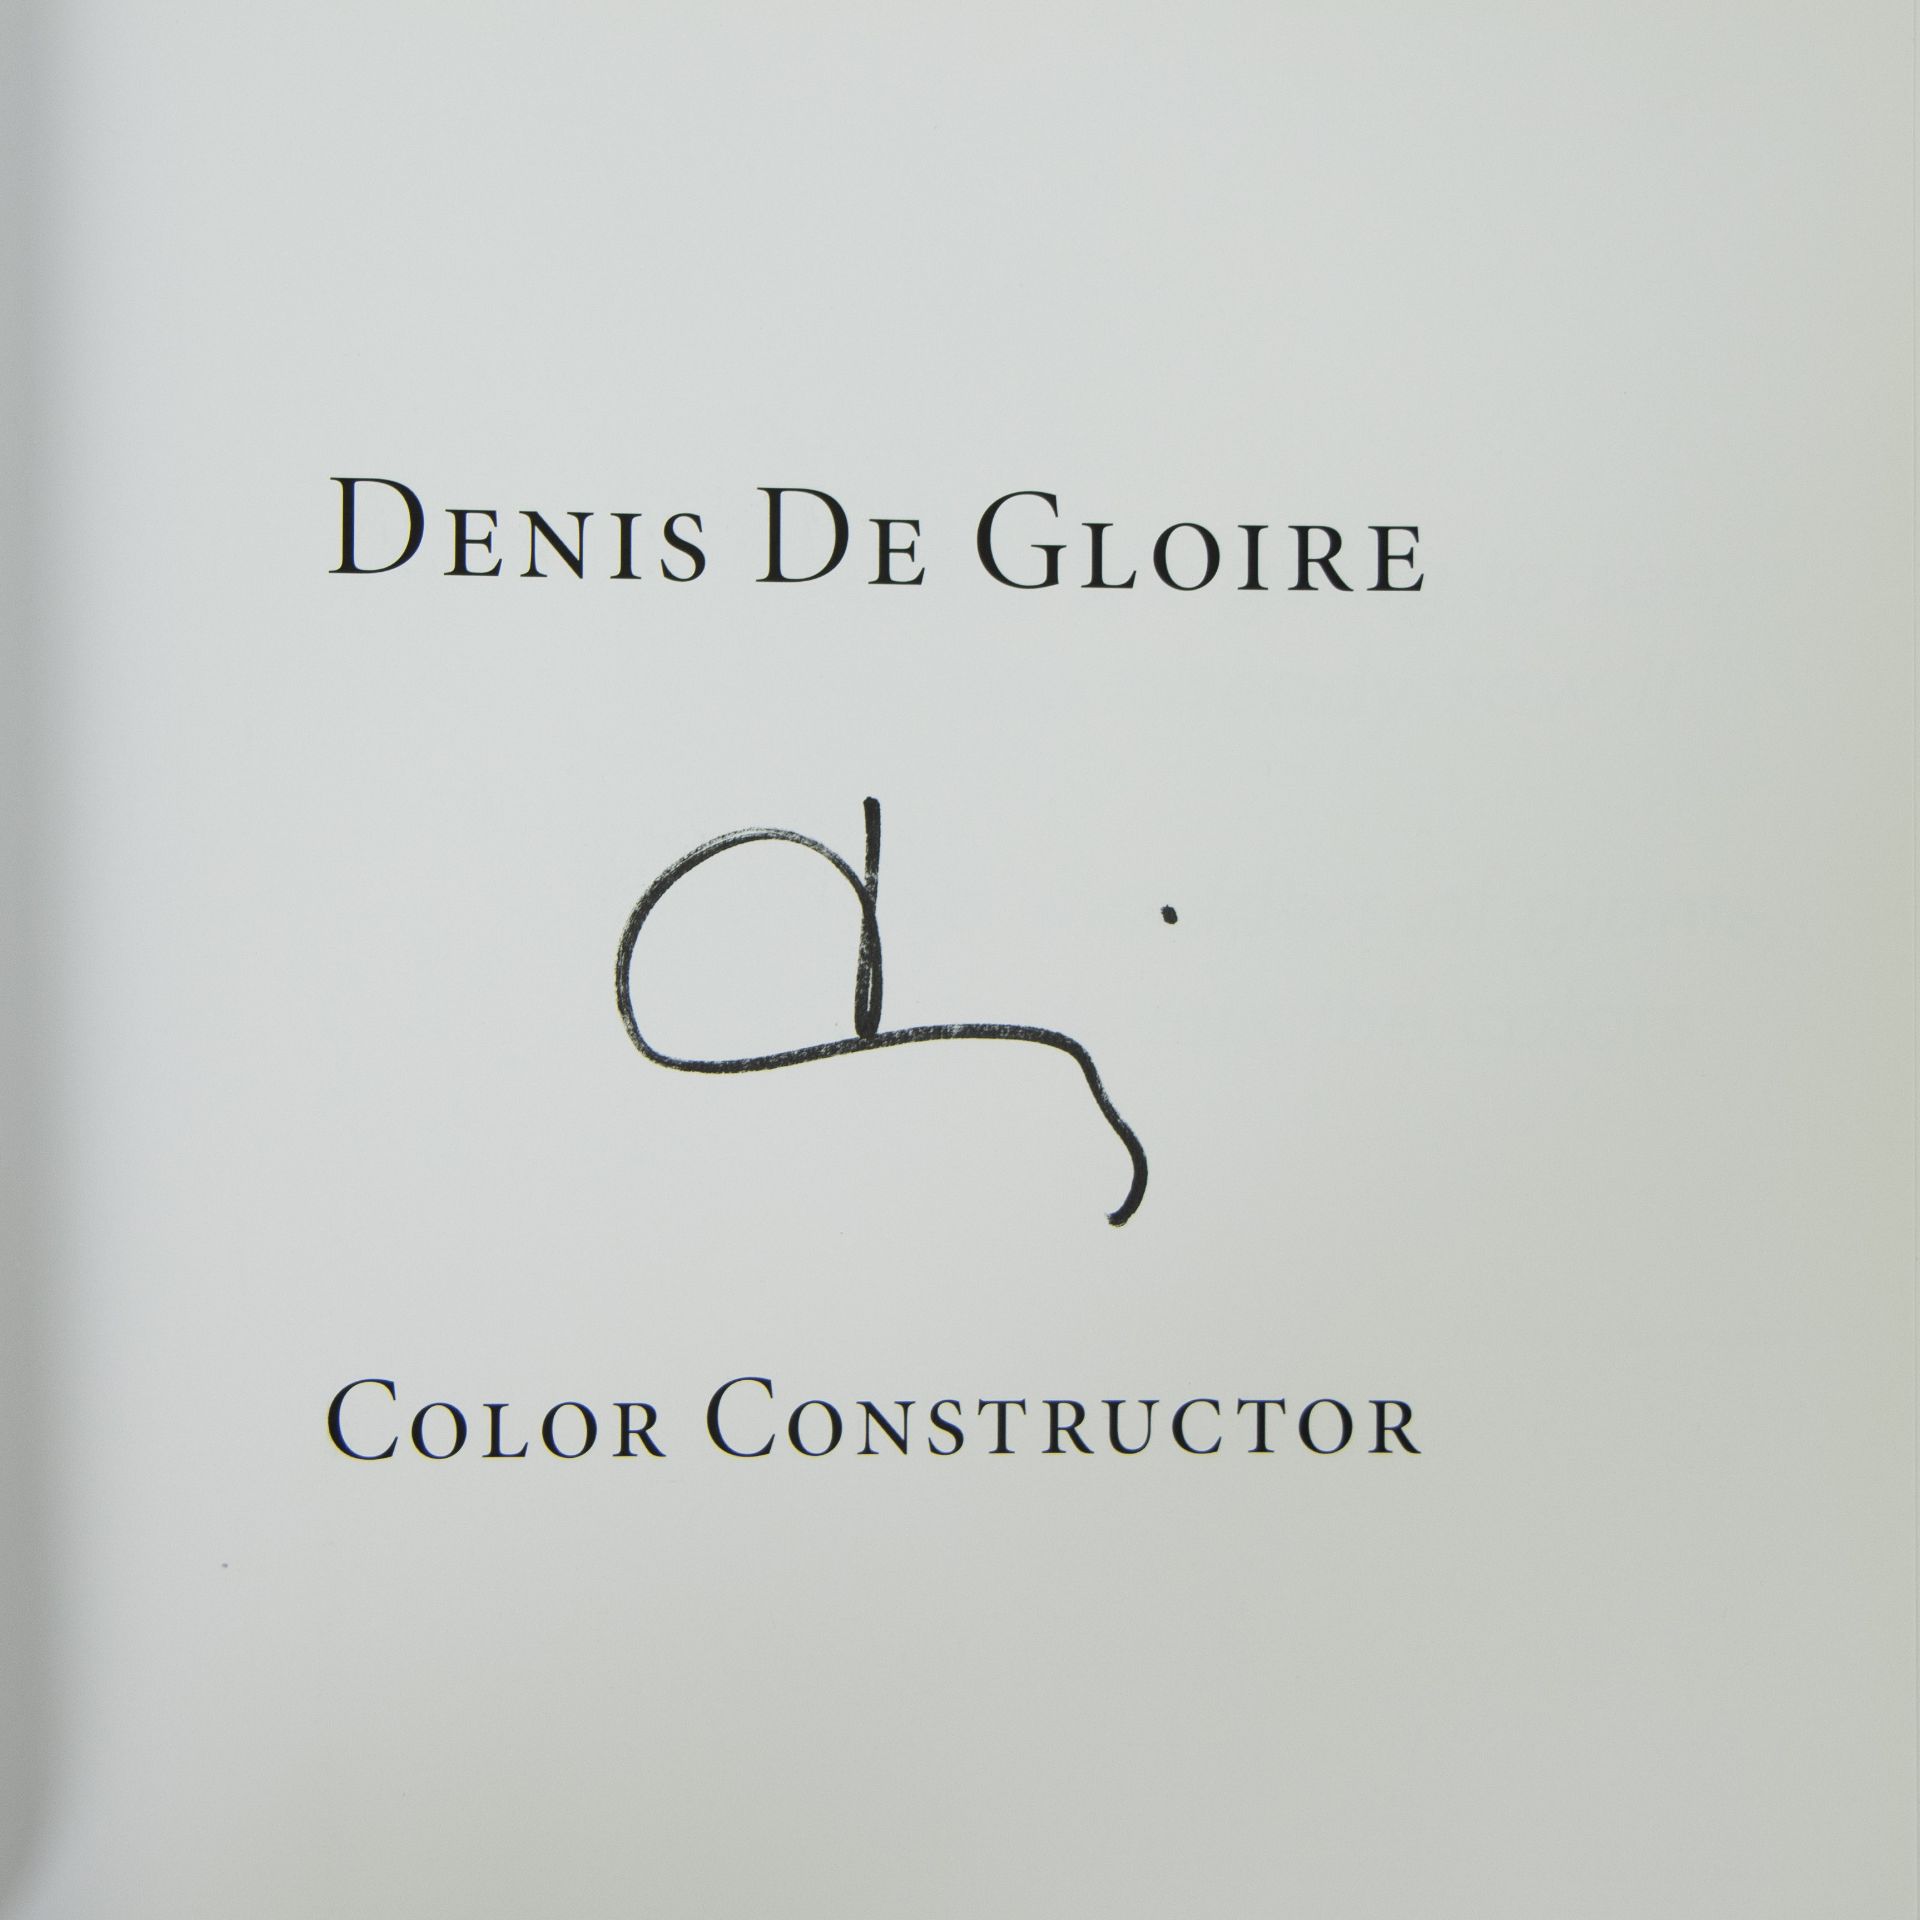 Denis DE GLOIRE (1959), book Color Constructor with painted cover (on canvas), signed and dated 2015 - Image 3 of 5